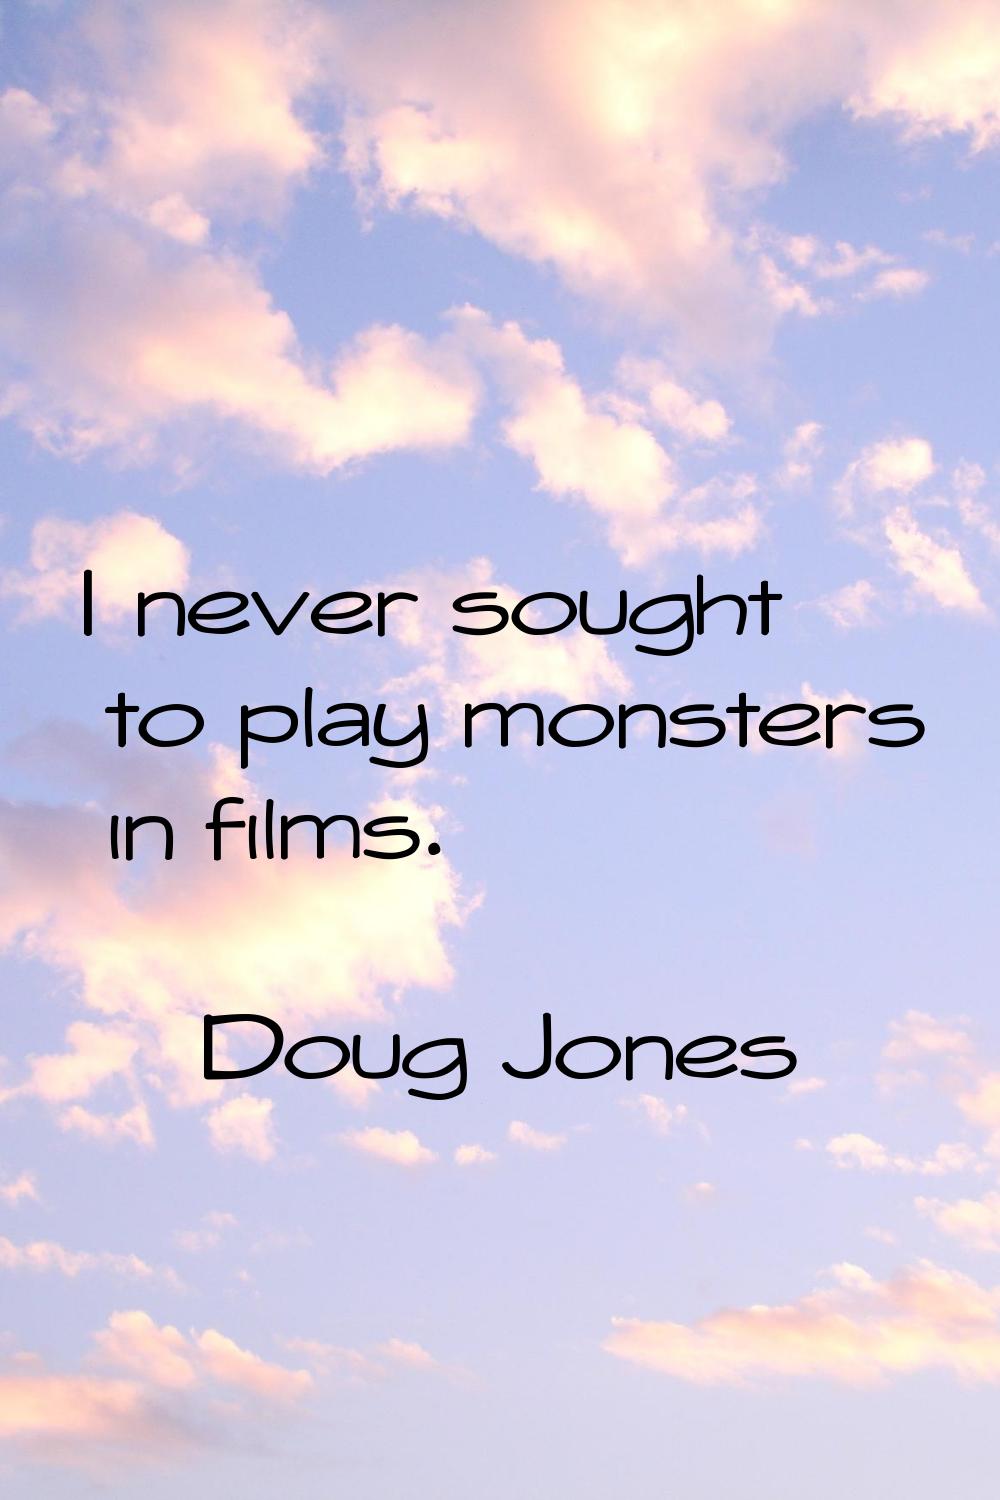 I never sought to play monsters in films.